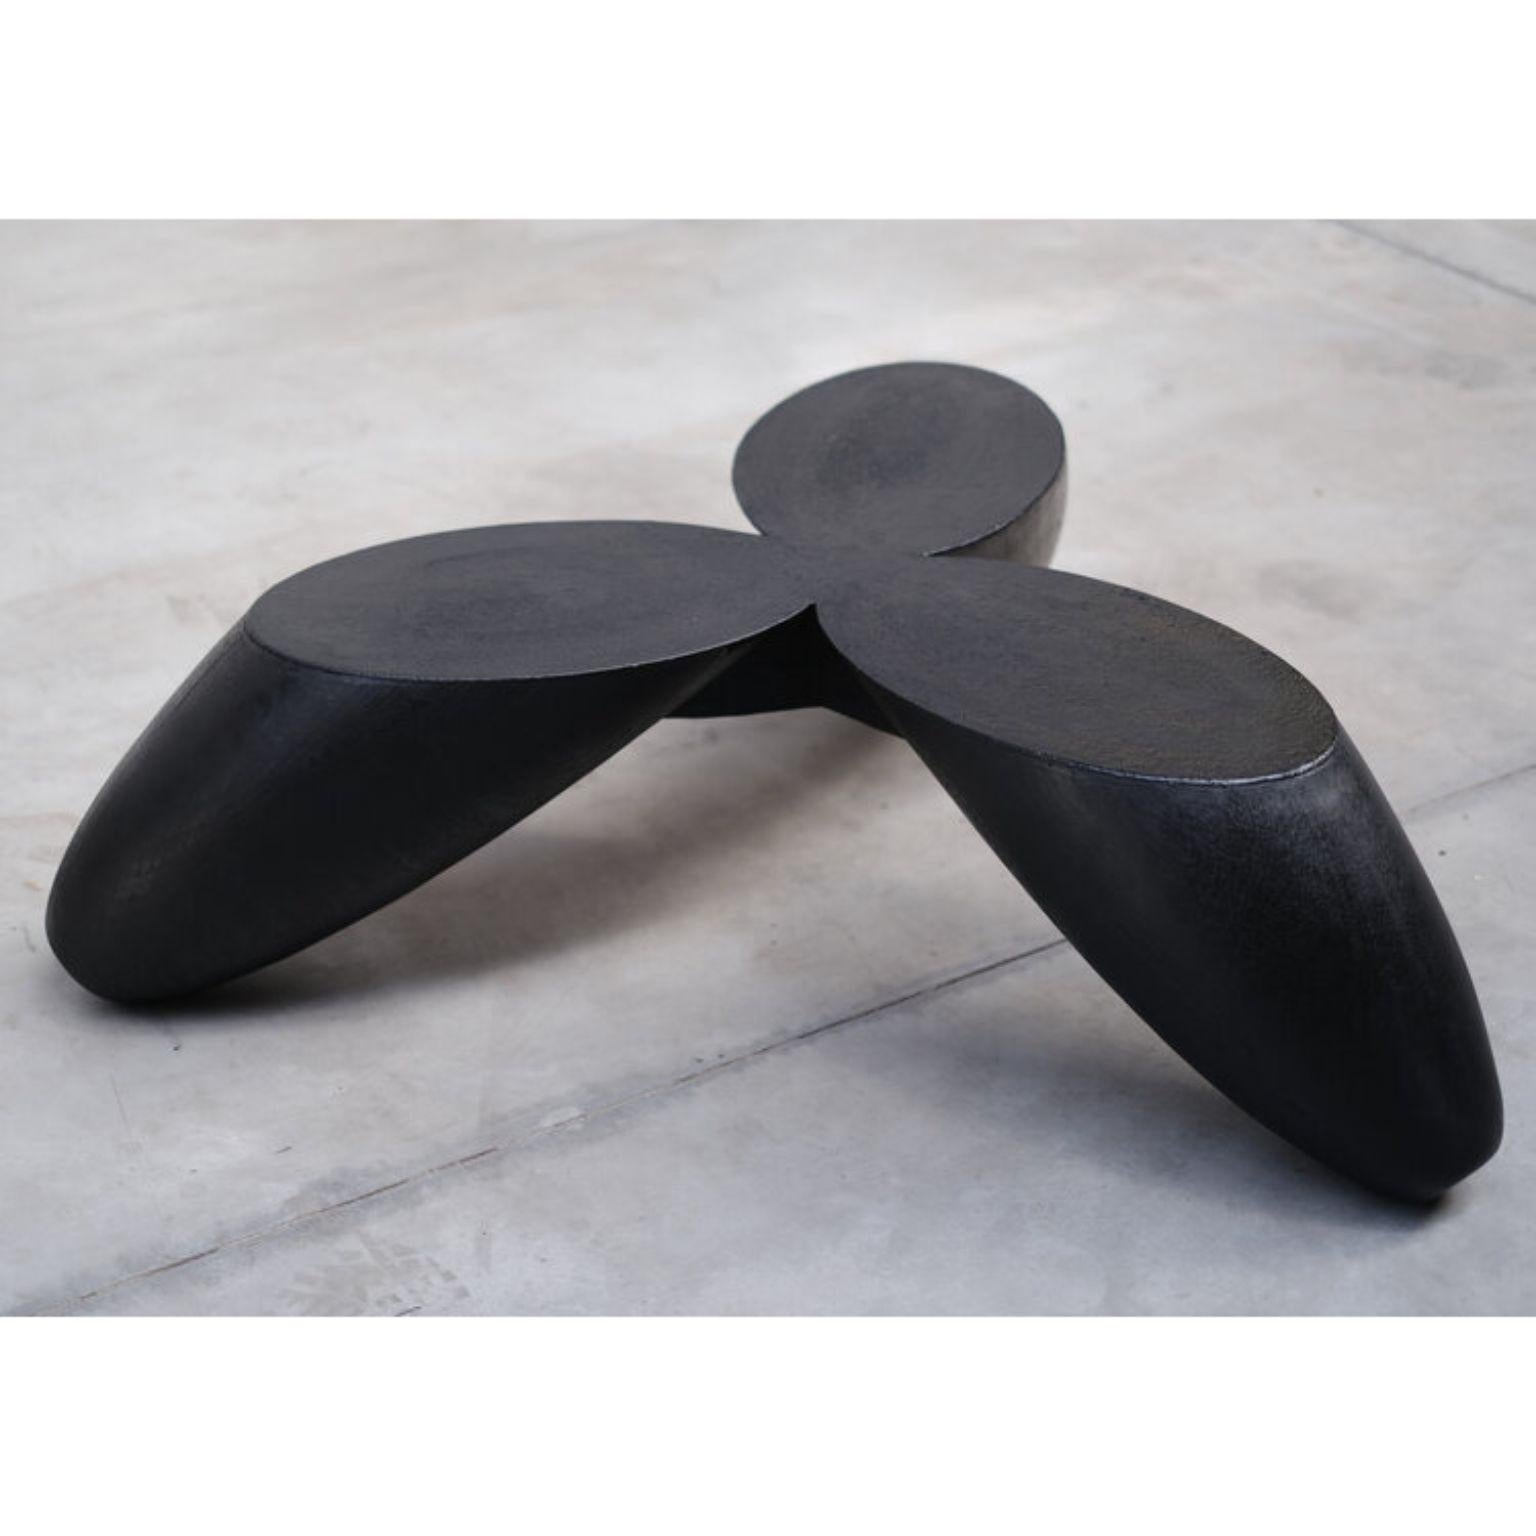 Senufo tripod coffee table by Arno Declercq
Dimensions: W 108 x L 108 x H 30 cm
Materials: Made in burned and waxed iroko wood, burned steel.

Arno Declercq
Belgian designer and art dealer who makes bespoke objects with passion for design,